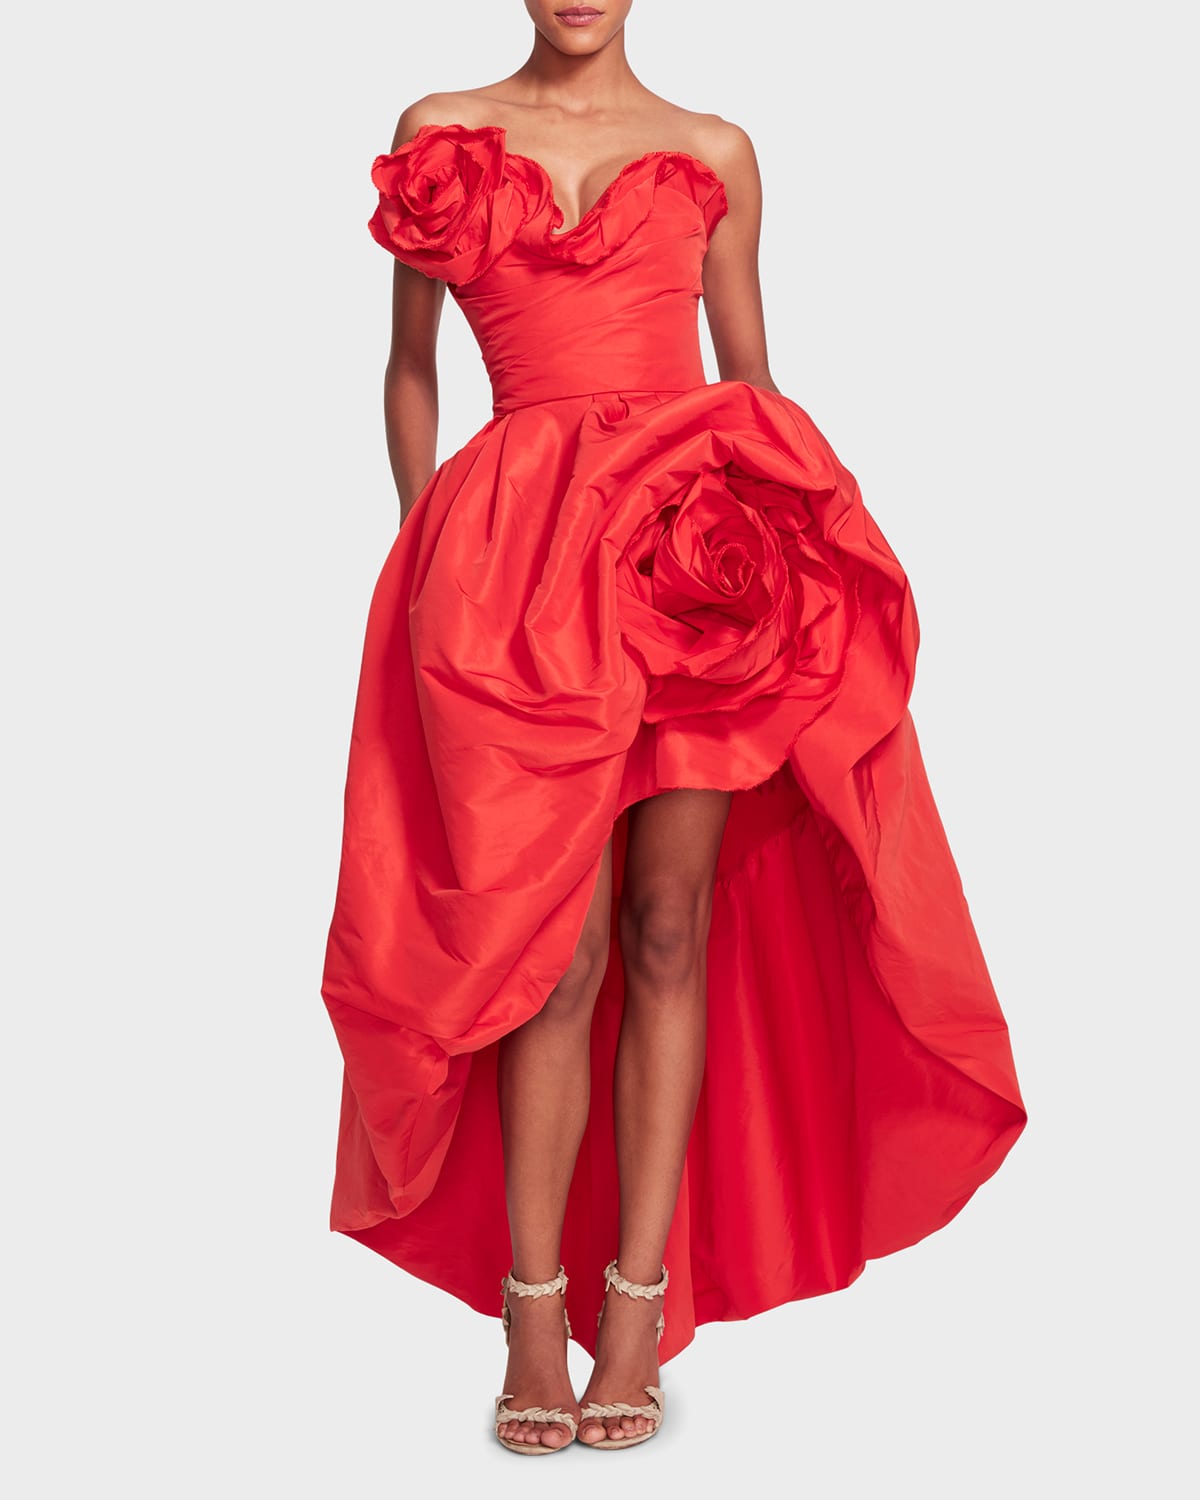 MARCHESA ASYMMETRIC HIGH-LOW FAILLE GOWN WITH SCULPTURAL ROSE DETAILS